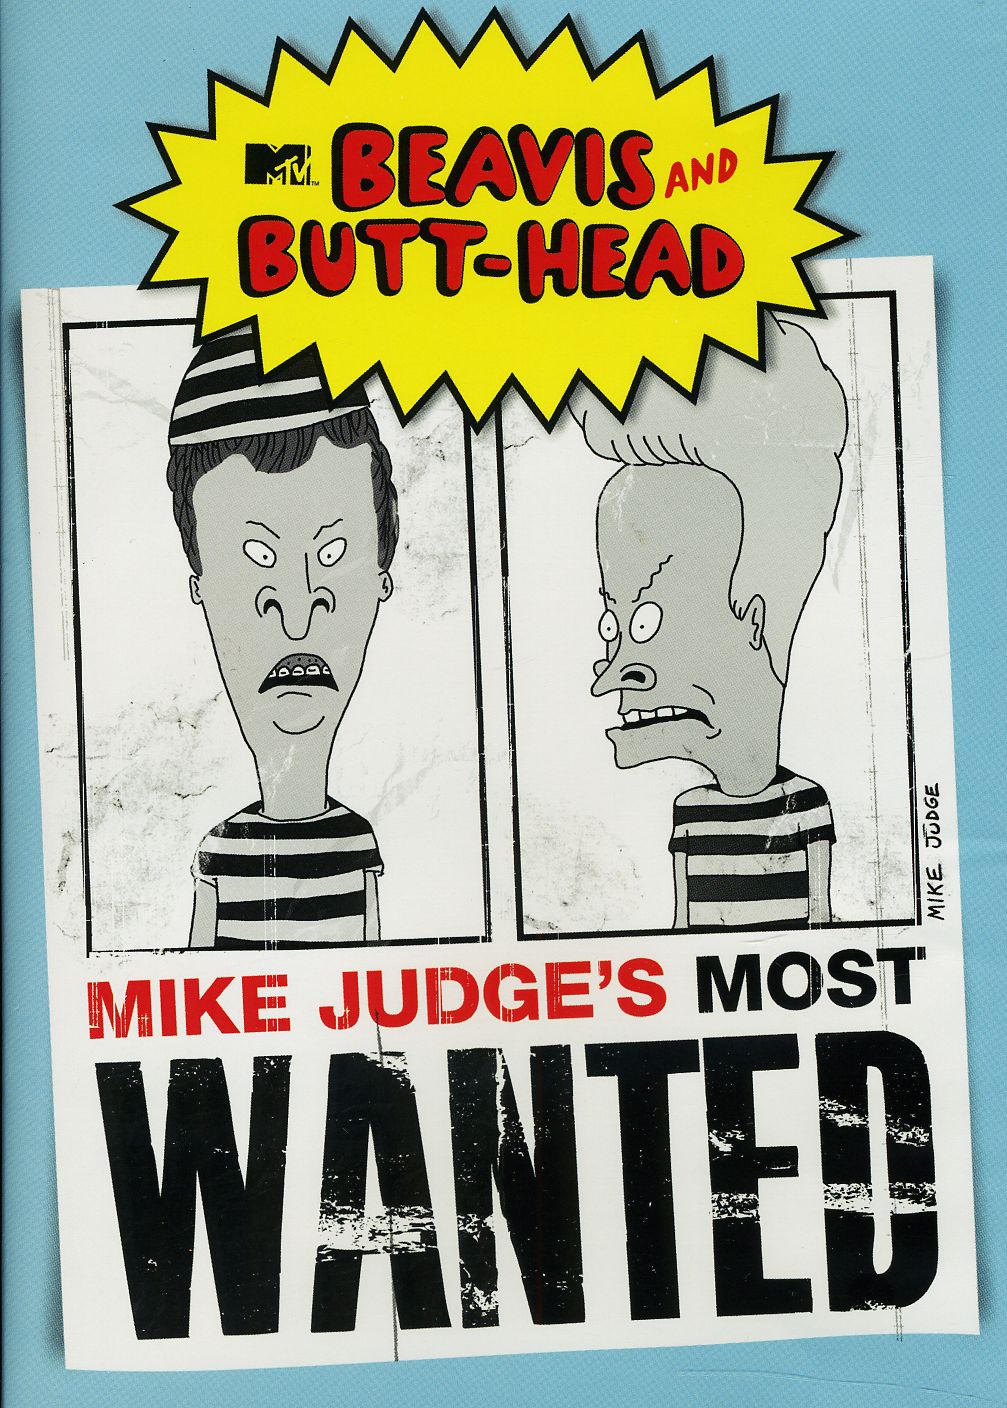 BEAVIS & BUTTHEAD: MIKE JUDGE'S MOST WANTED